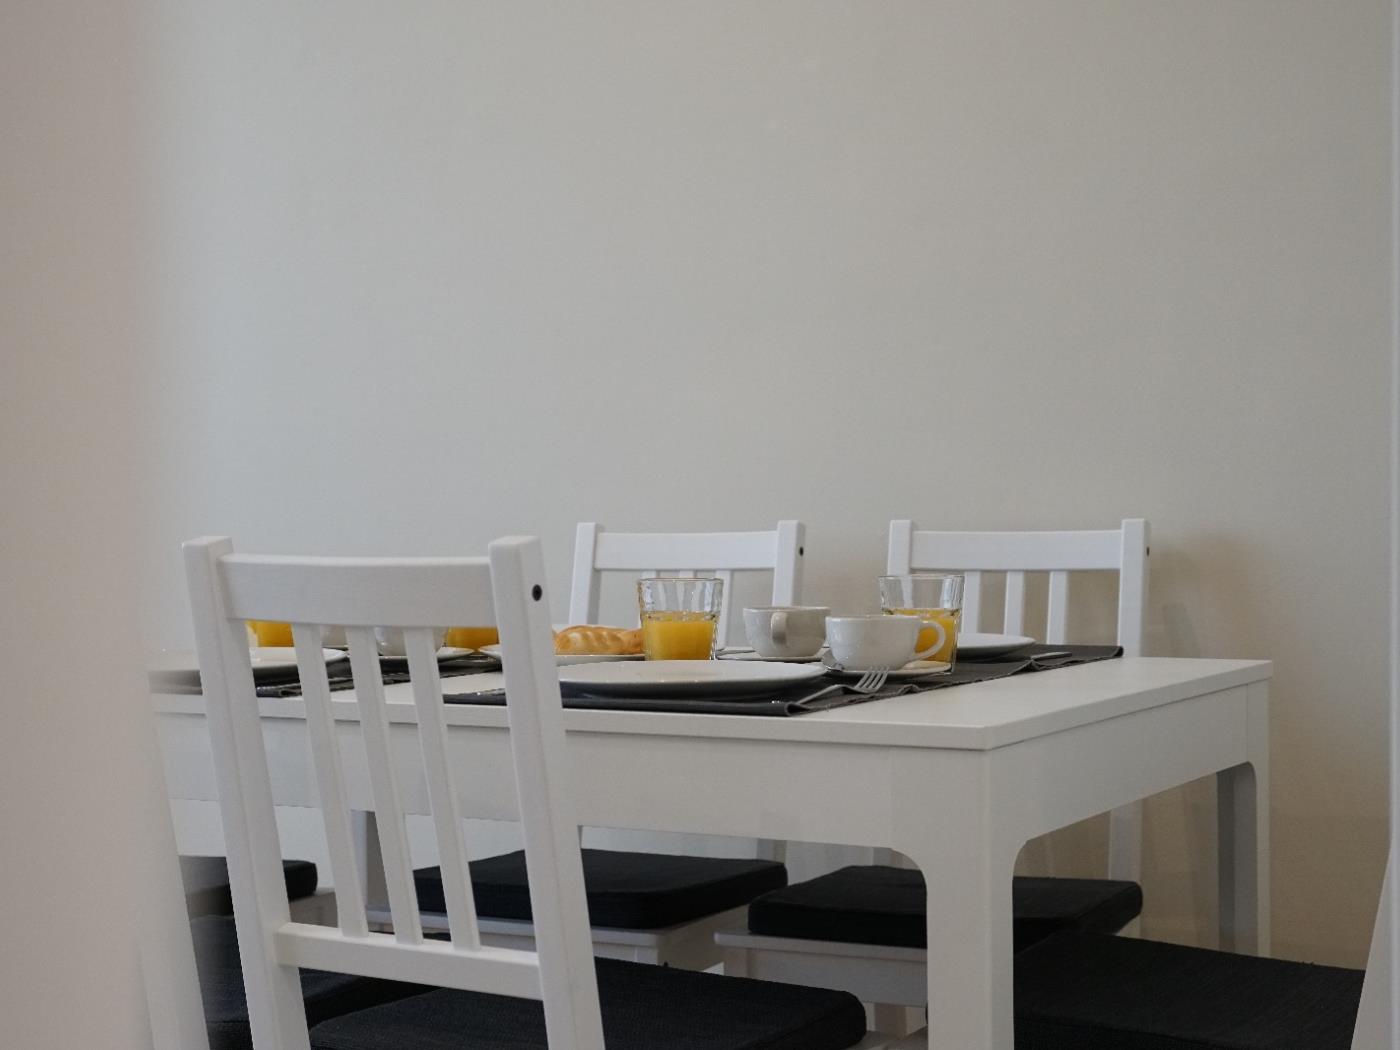 Newly refurbished apartment close to Fira de Barcelona - My Space Barcelona Apartments